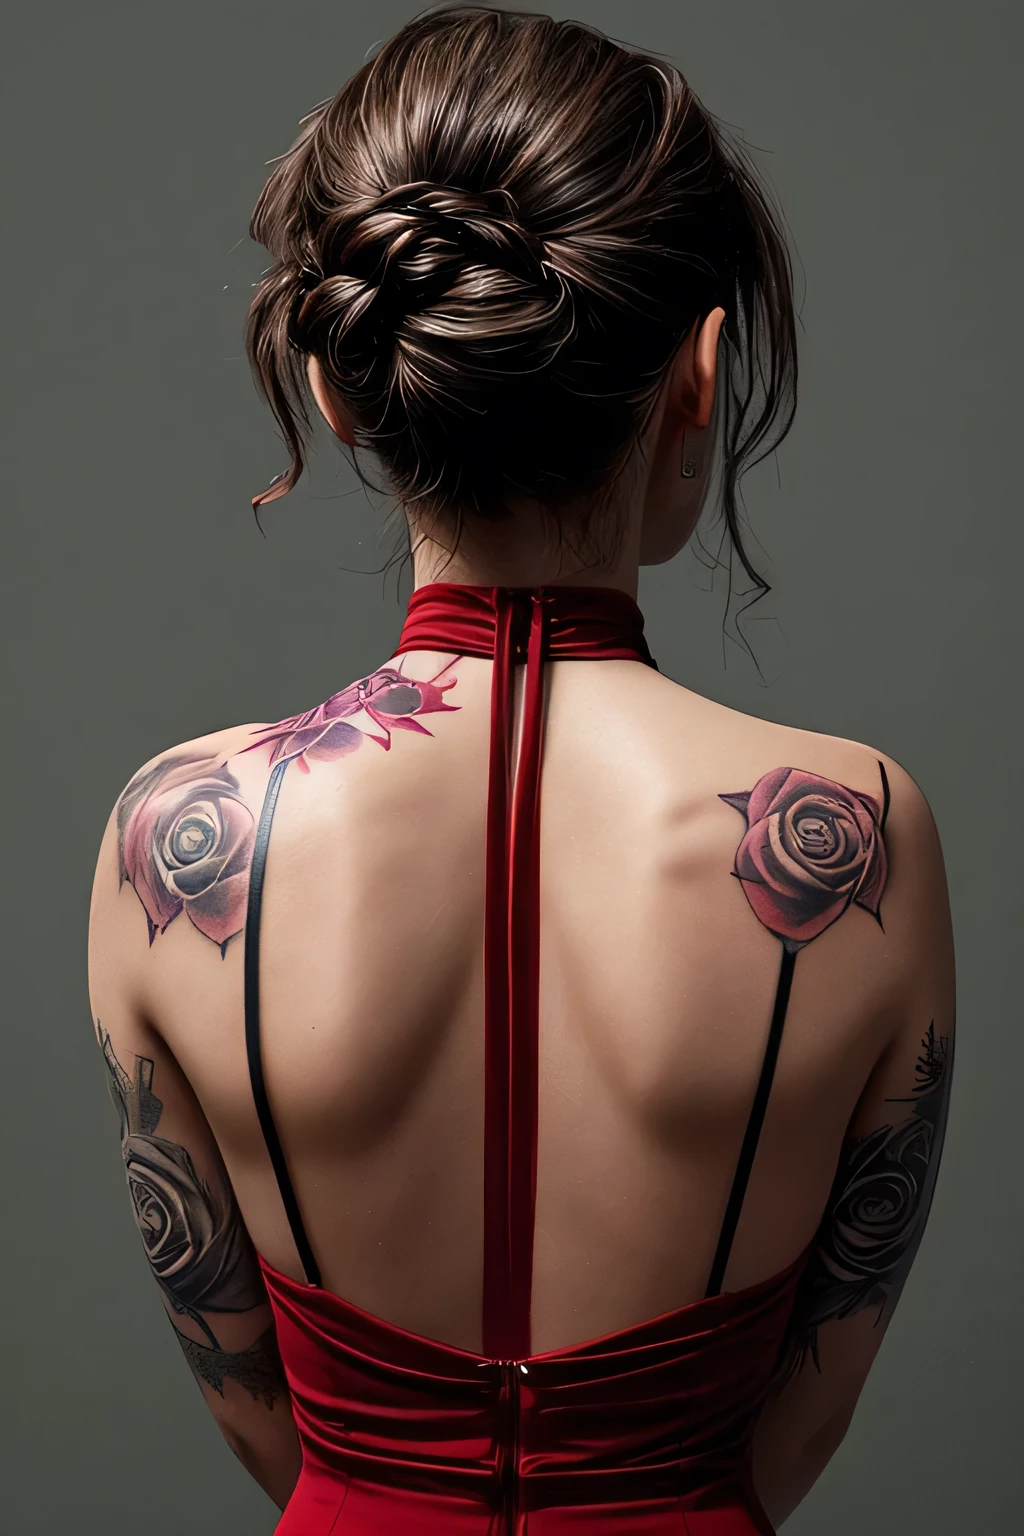 Woman's back view in a halter neck dress has a single rose tattooed on her back